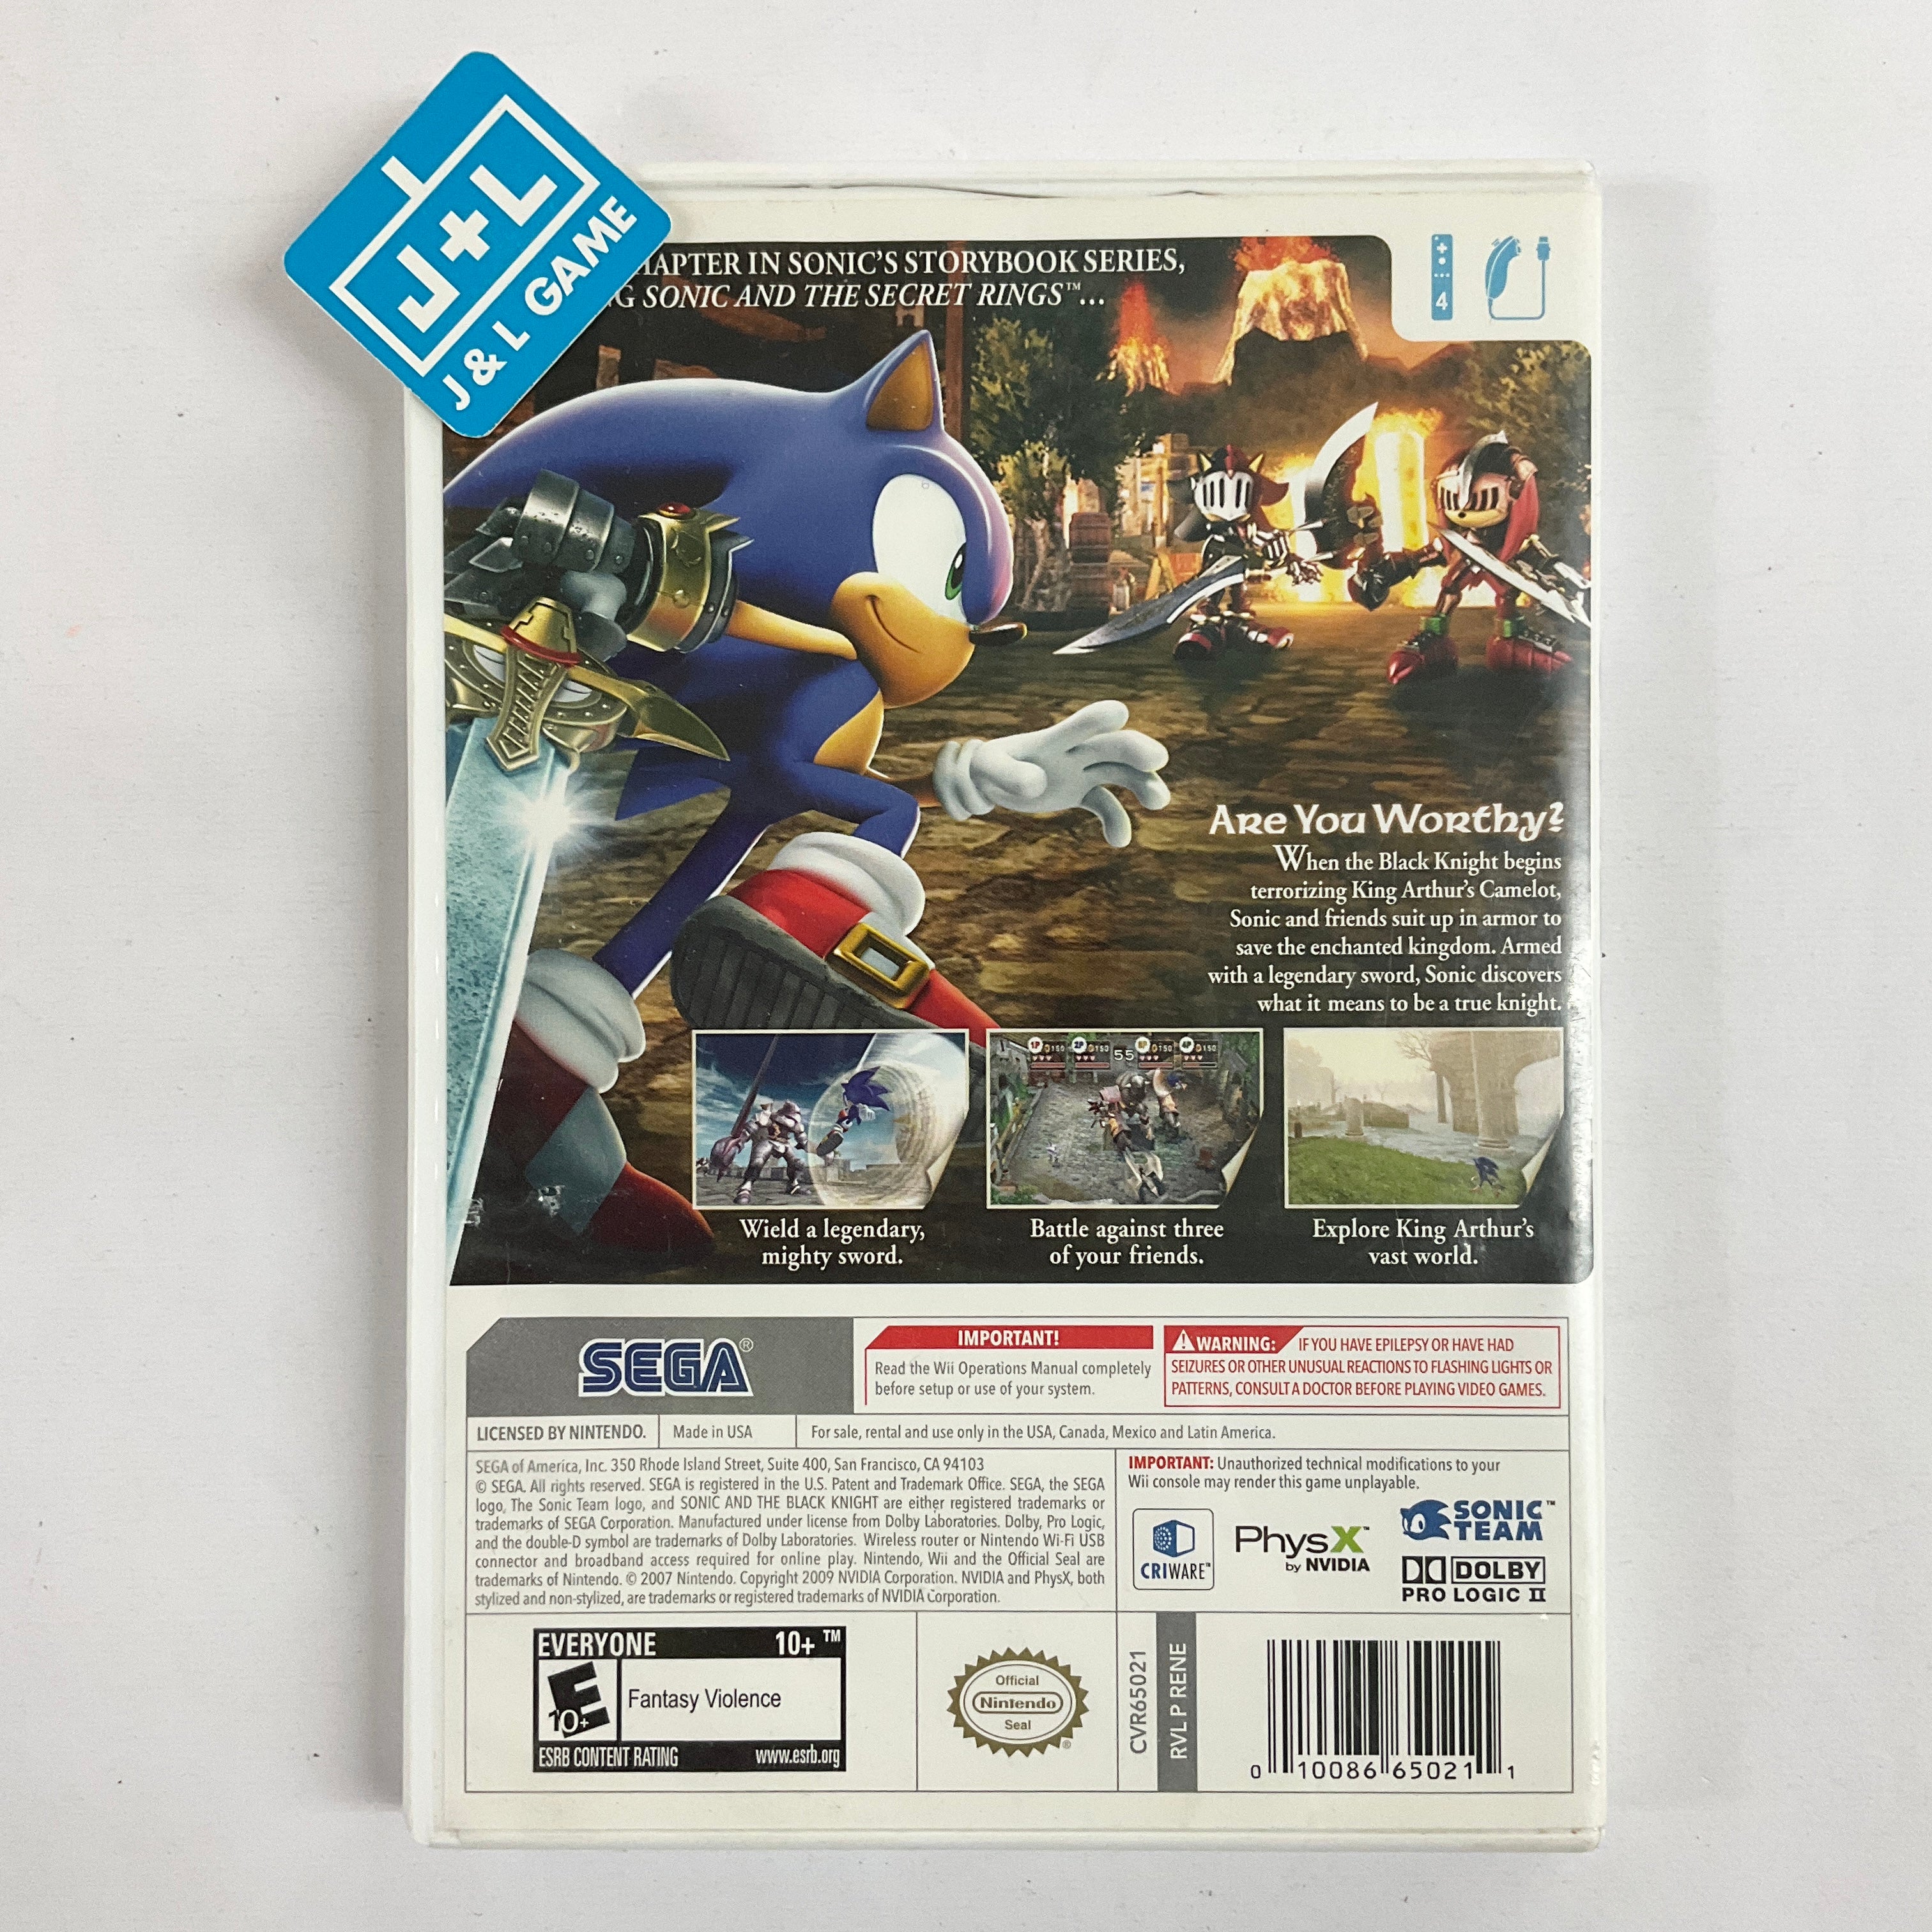 Sonic and the Black Knight - Nintendo Wii [Pre-Owned] Video Games Sega   